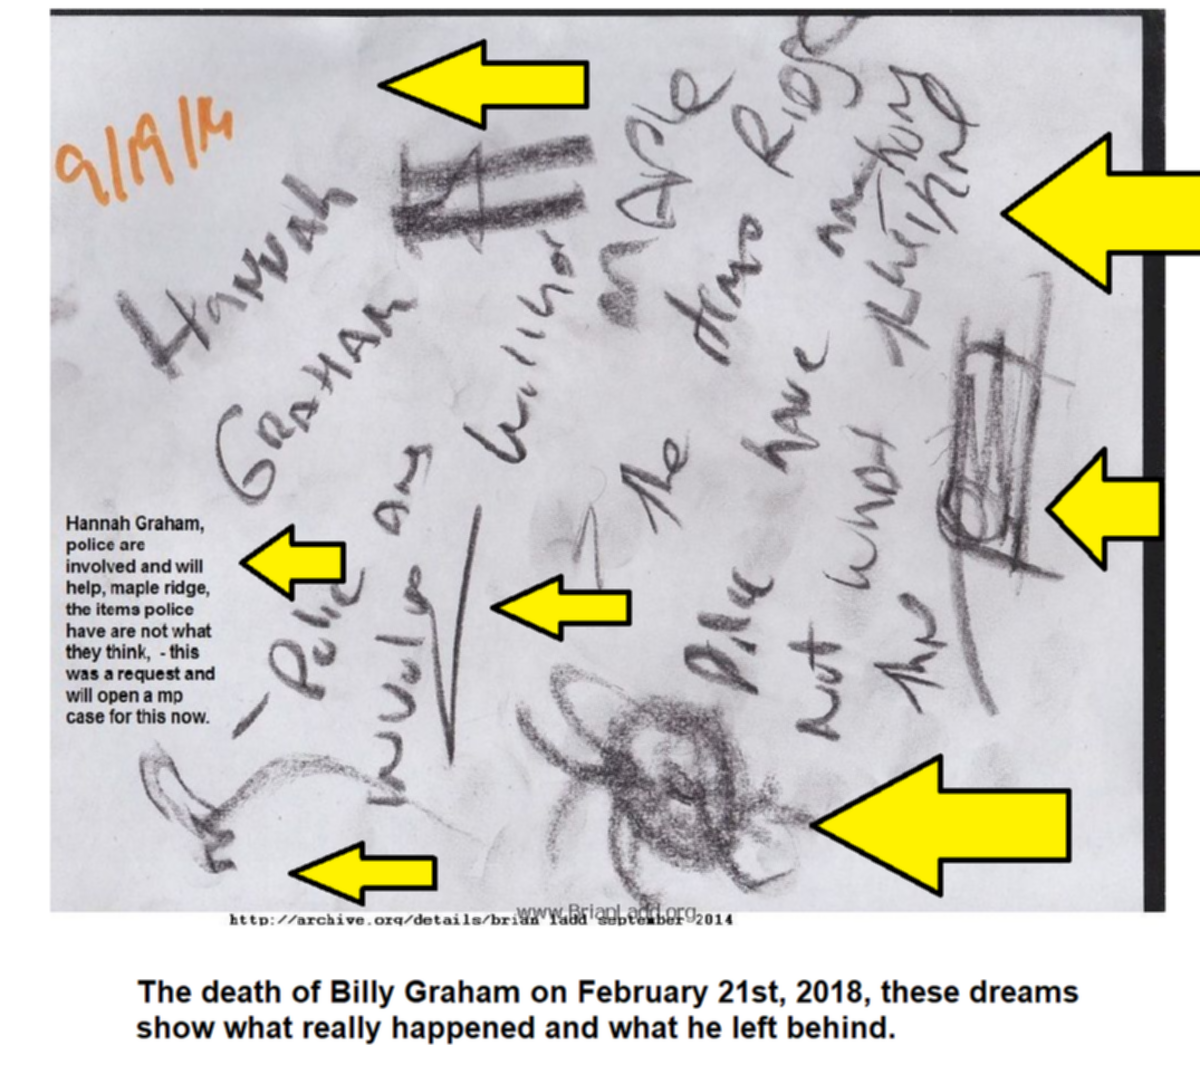 Hannah Graham The death of Billy Graham on February 21st 2018 these dreams show what really happened and what he left behind psychic
Hannah Graham The death of Billy Graham on February 21st 2018 these dreams show what really happened and what he left behind psychic
